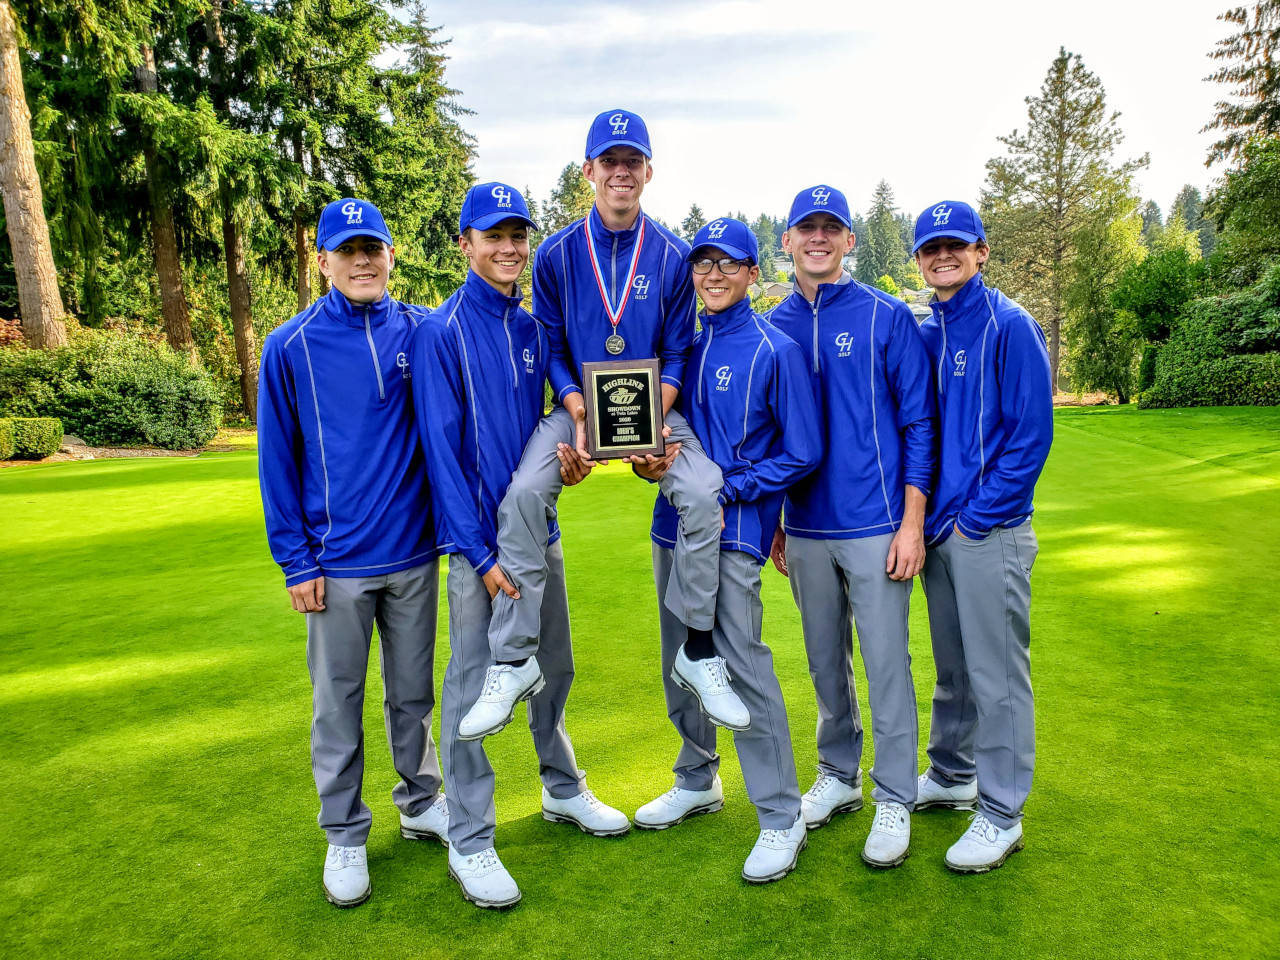 Grays Harbor College men’s golf team (from left) Carson Hughes, Ethan Heydel, Tyler Cassell, Andrew Kim, Jaron Howell and Brady Hinds finished in second place at the Highline Showdown on Sunday in Federal Way. Cassell won the individual title with a 3-under par score of 69. (Submitted photo)